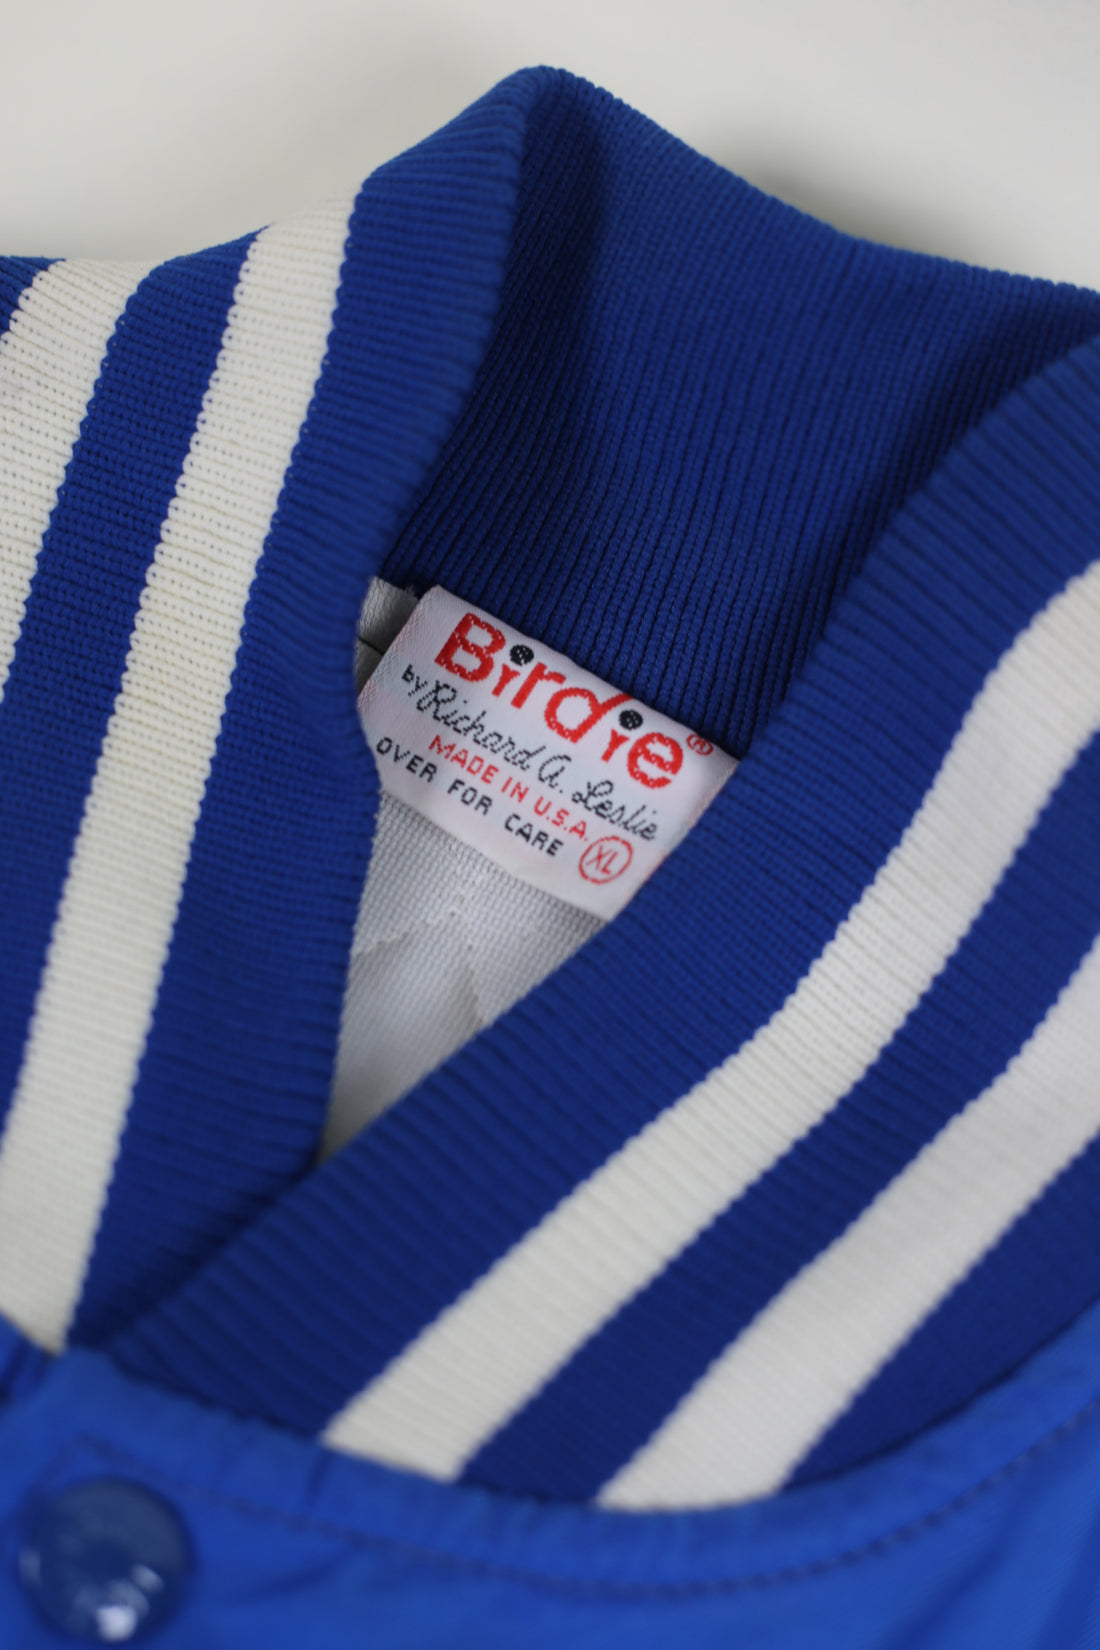 VINTAGE NYLON JACKET MADE IN USA DODGERS - XL -